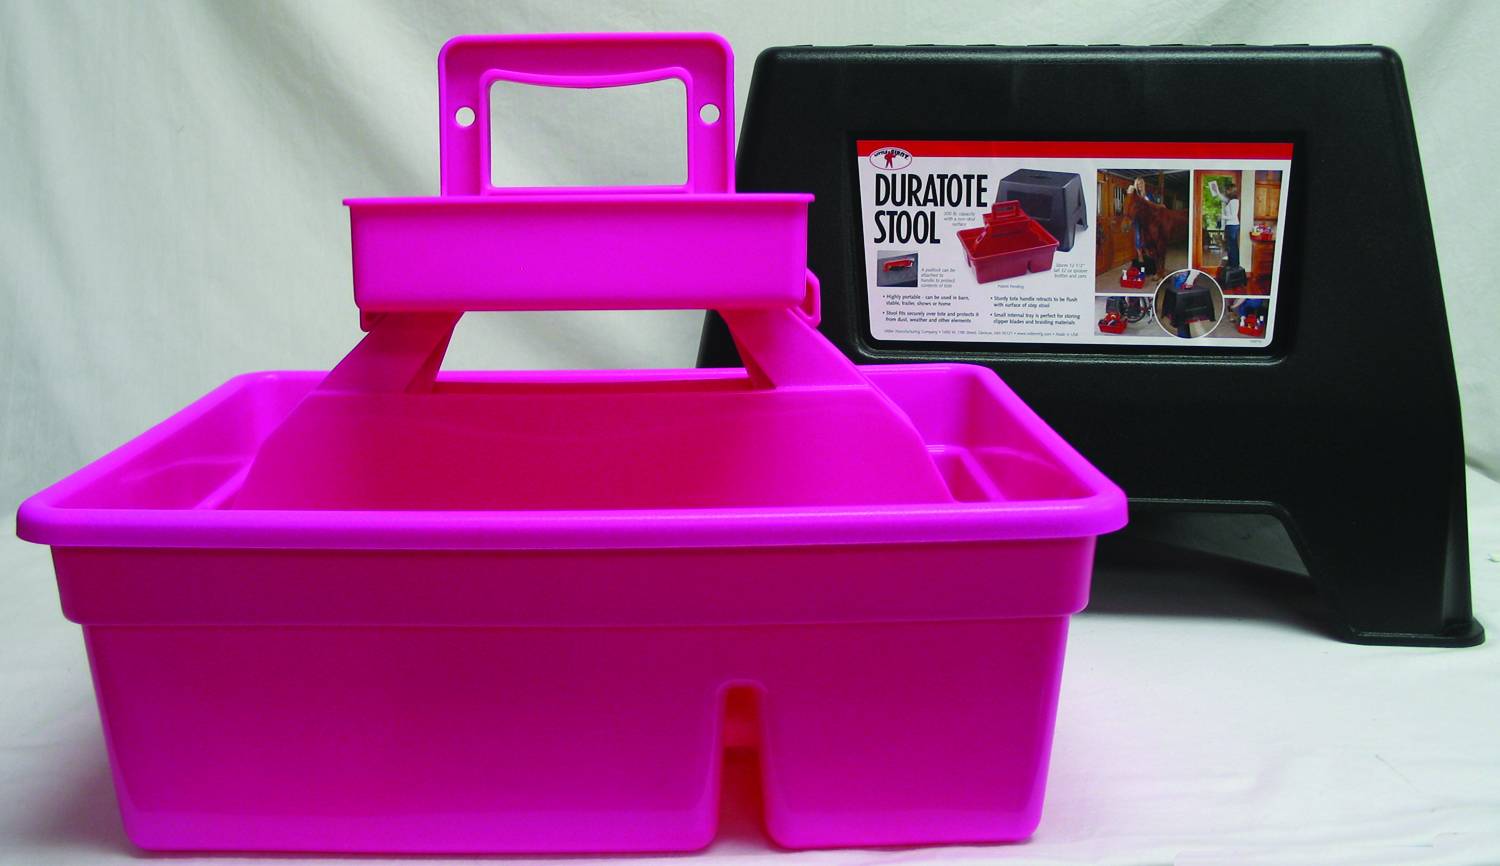 Duratote Step Stool with Grooming Box 